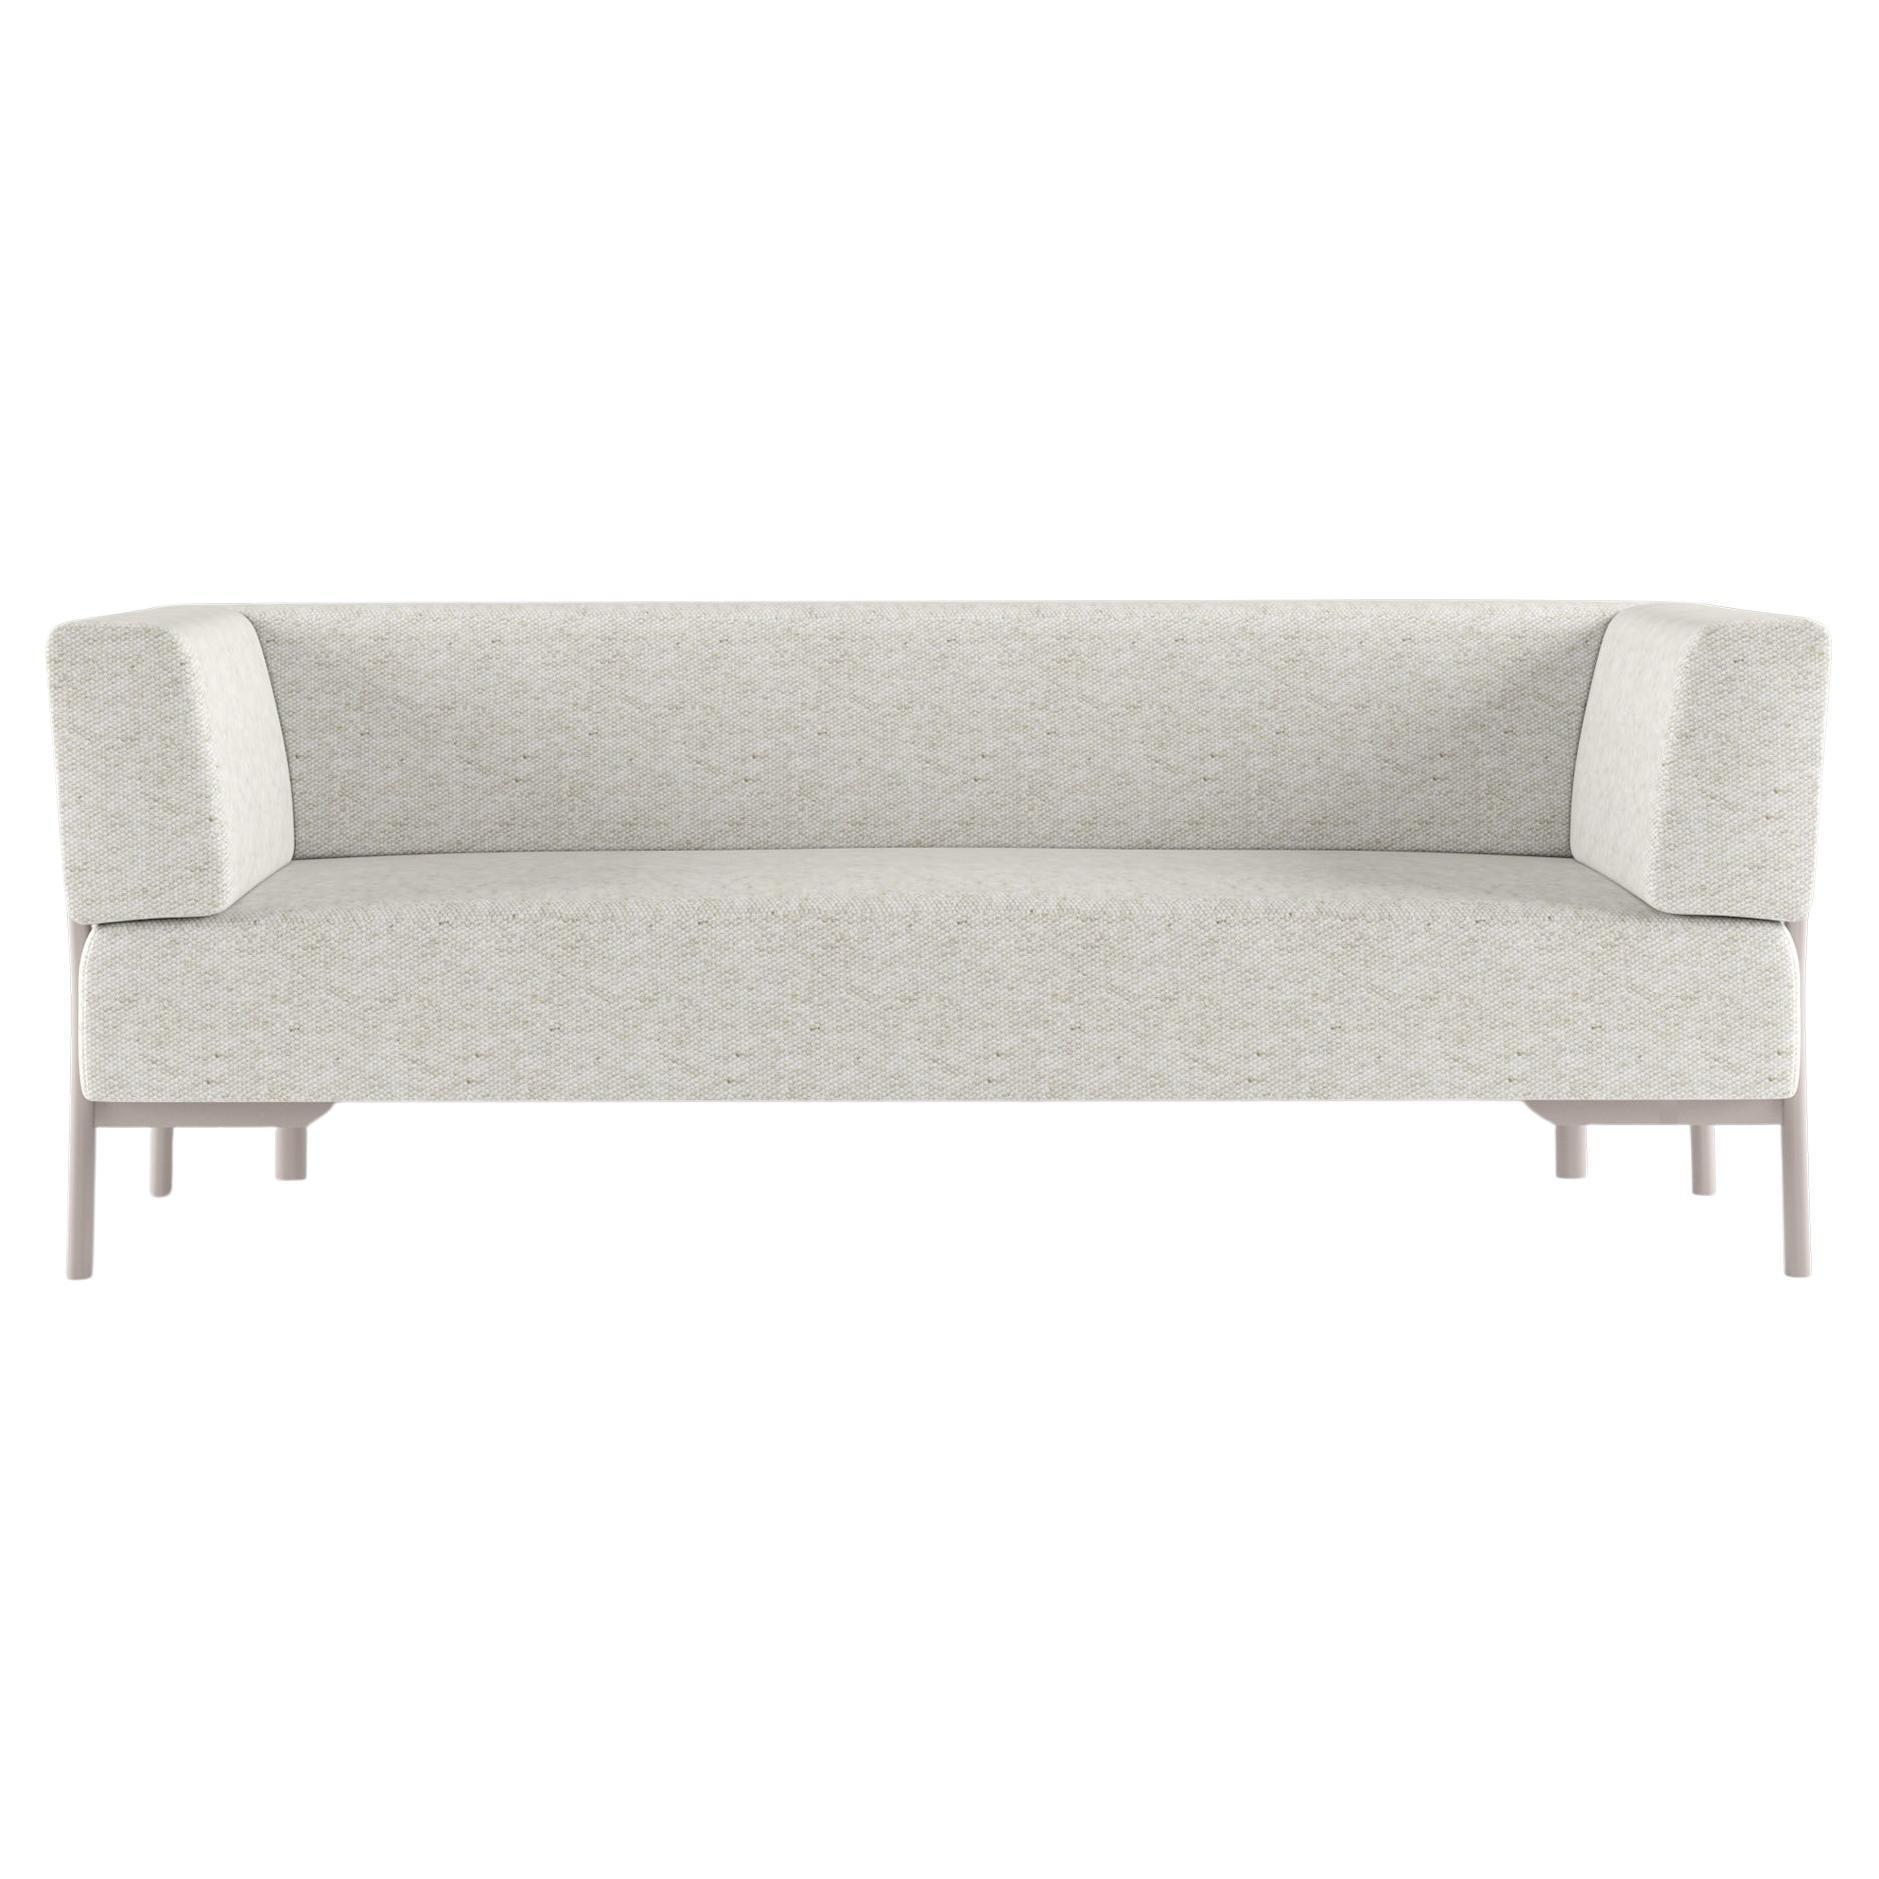 Alias T02_O Ten 2 Seater Outdoor Sofa in White and Sand Lacquered Aluminum Frame For Sale